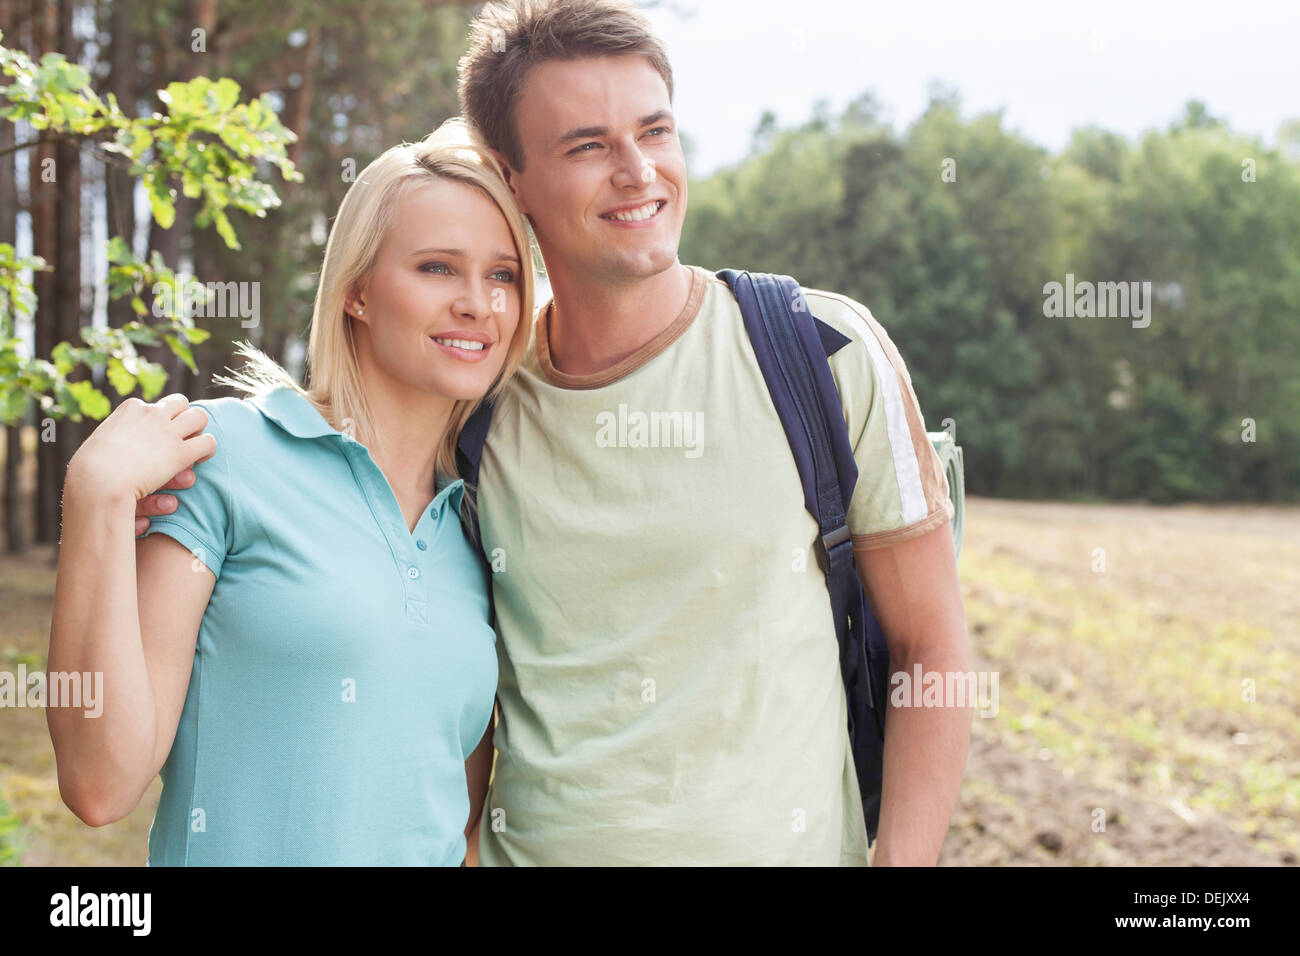 Thoughtful young couple smiling while hiking forest Stock Photo